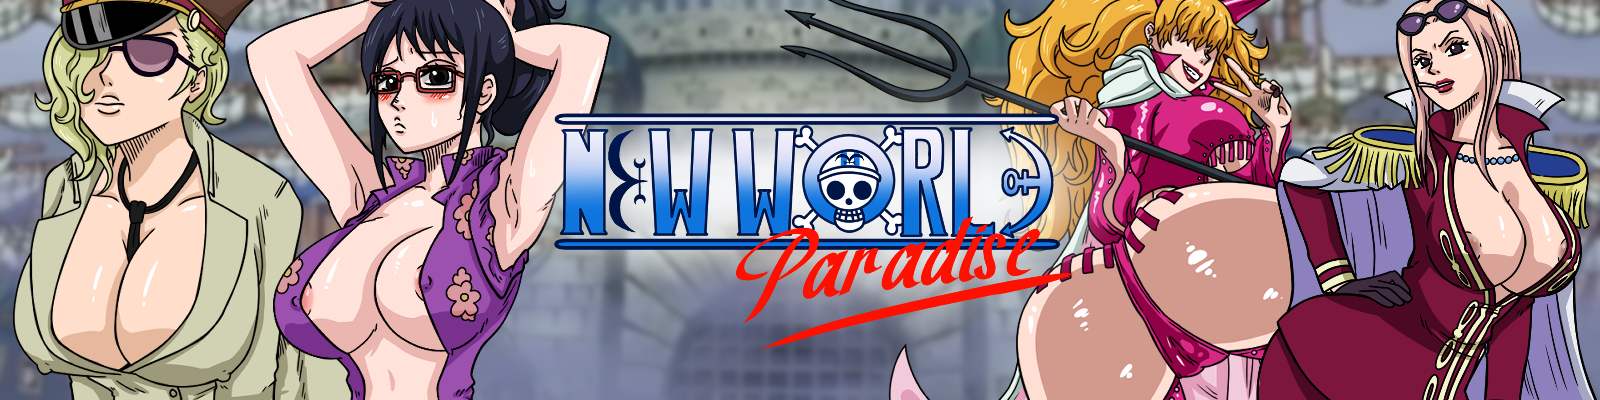 New World Paradise [DingoDeer] Adult xxx Game Download